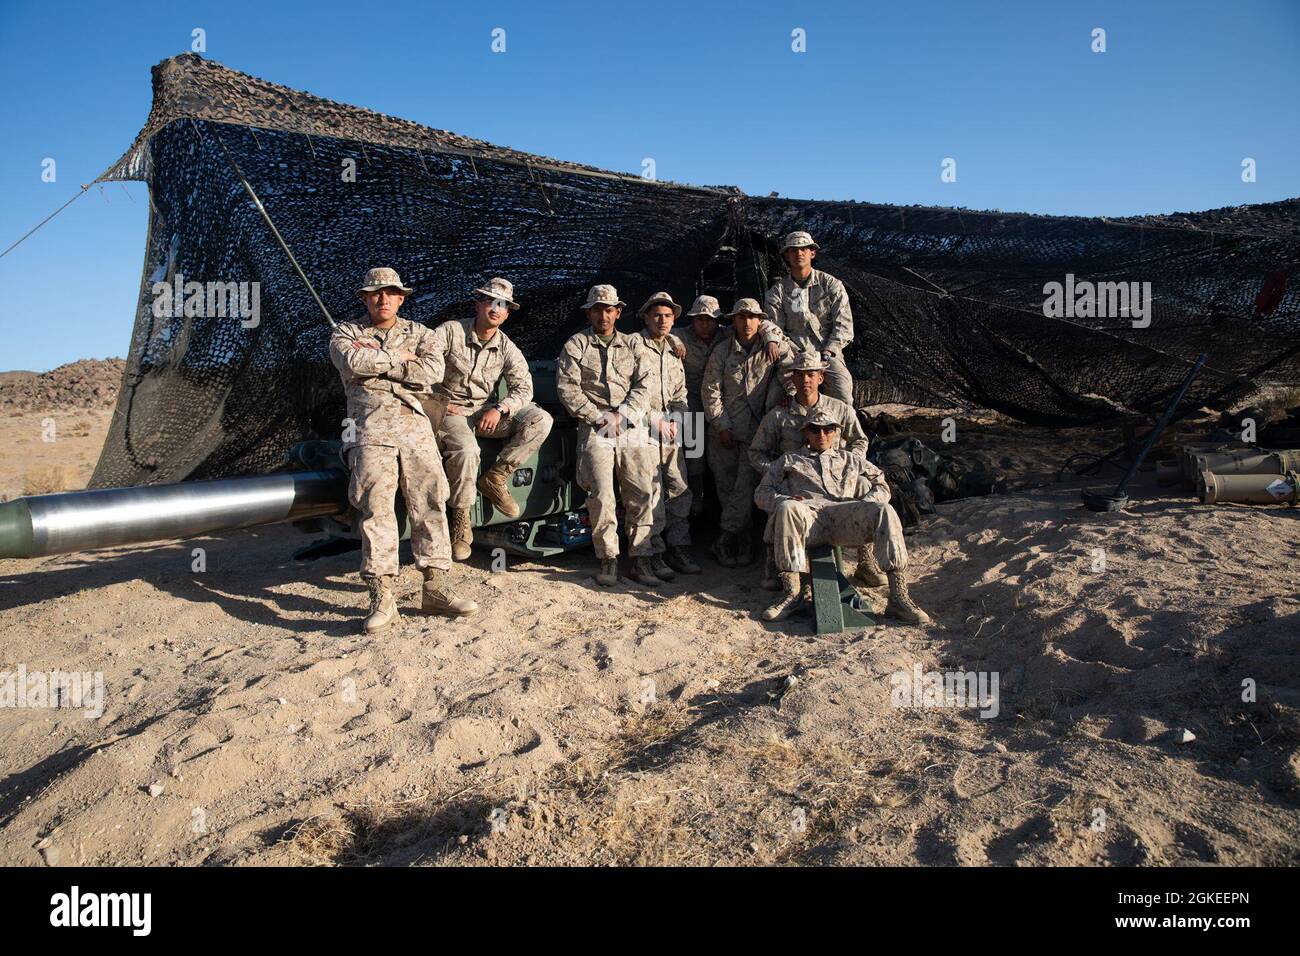 U.S. Marines with Battery A, 1st Battalion, 11th Marine Regiment, 1st Marine Division, stand by with an M777 towed 155 mm howitzer to commence a live-fire defense simulation at the Marine Corps Air Ground Combat Center in Twentynine Palms, California, March 30, 2021. This live-fire defense was set up with M777 towed 155 mm howitzers, .50-caliber machine guns, M240B machine guns as well as M4 carbines and M16A1 rifles, to repel notional enemy attacks from the artillery position. Stock Photo